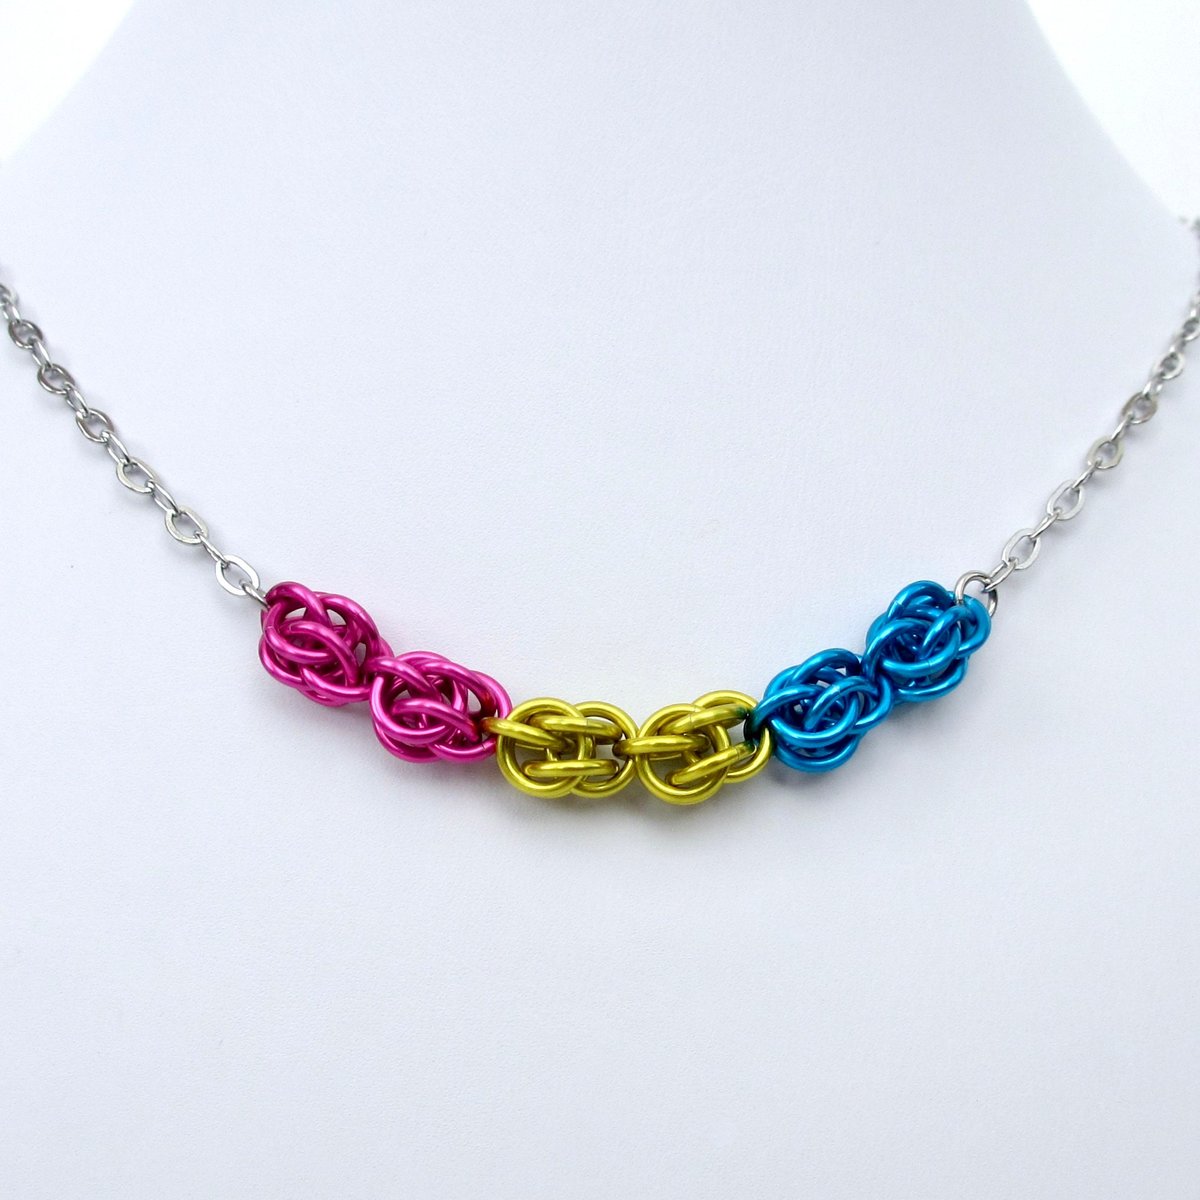 Pan pride necklace, chainmail Sweetpea weave pansexual jewelry